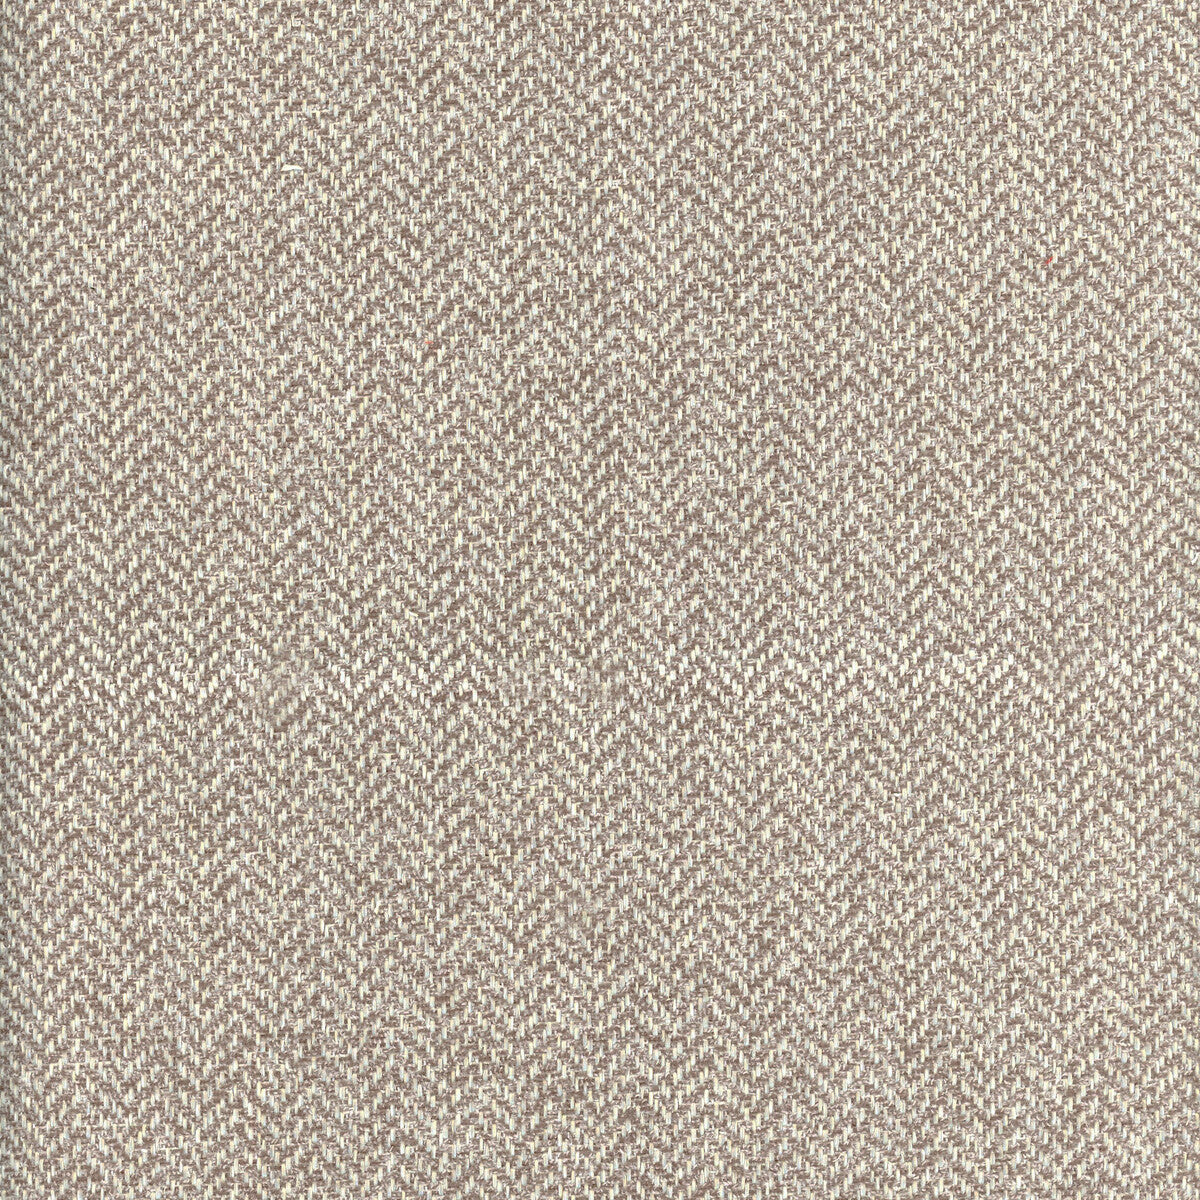 Nevada fabric in shale color - pattern AM100329.106.0 - by Kravet Couture in the Andrew Martin Canyon collection